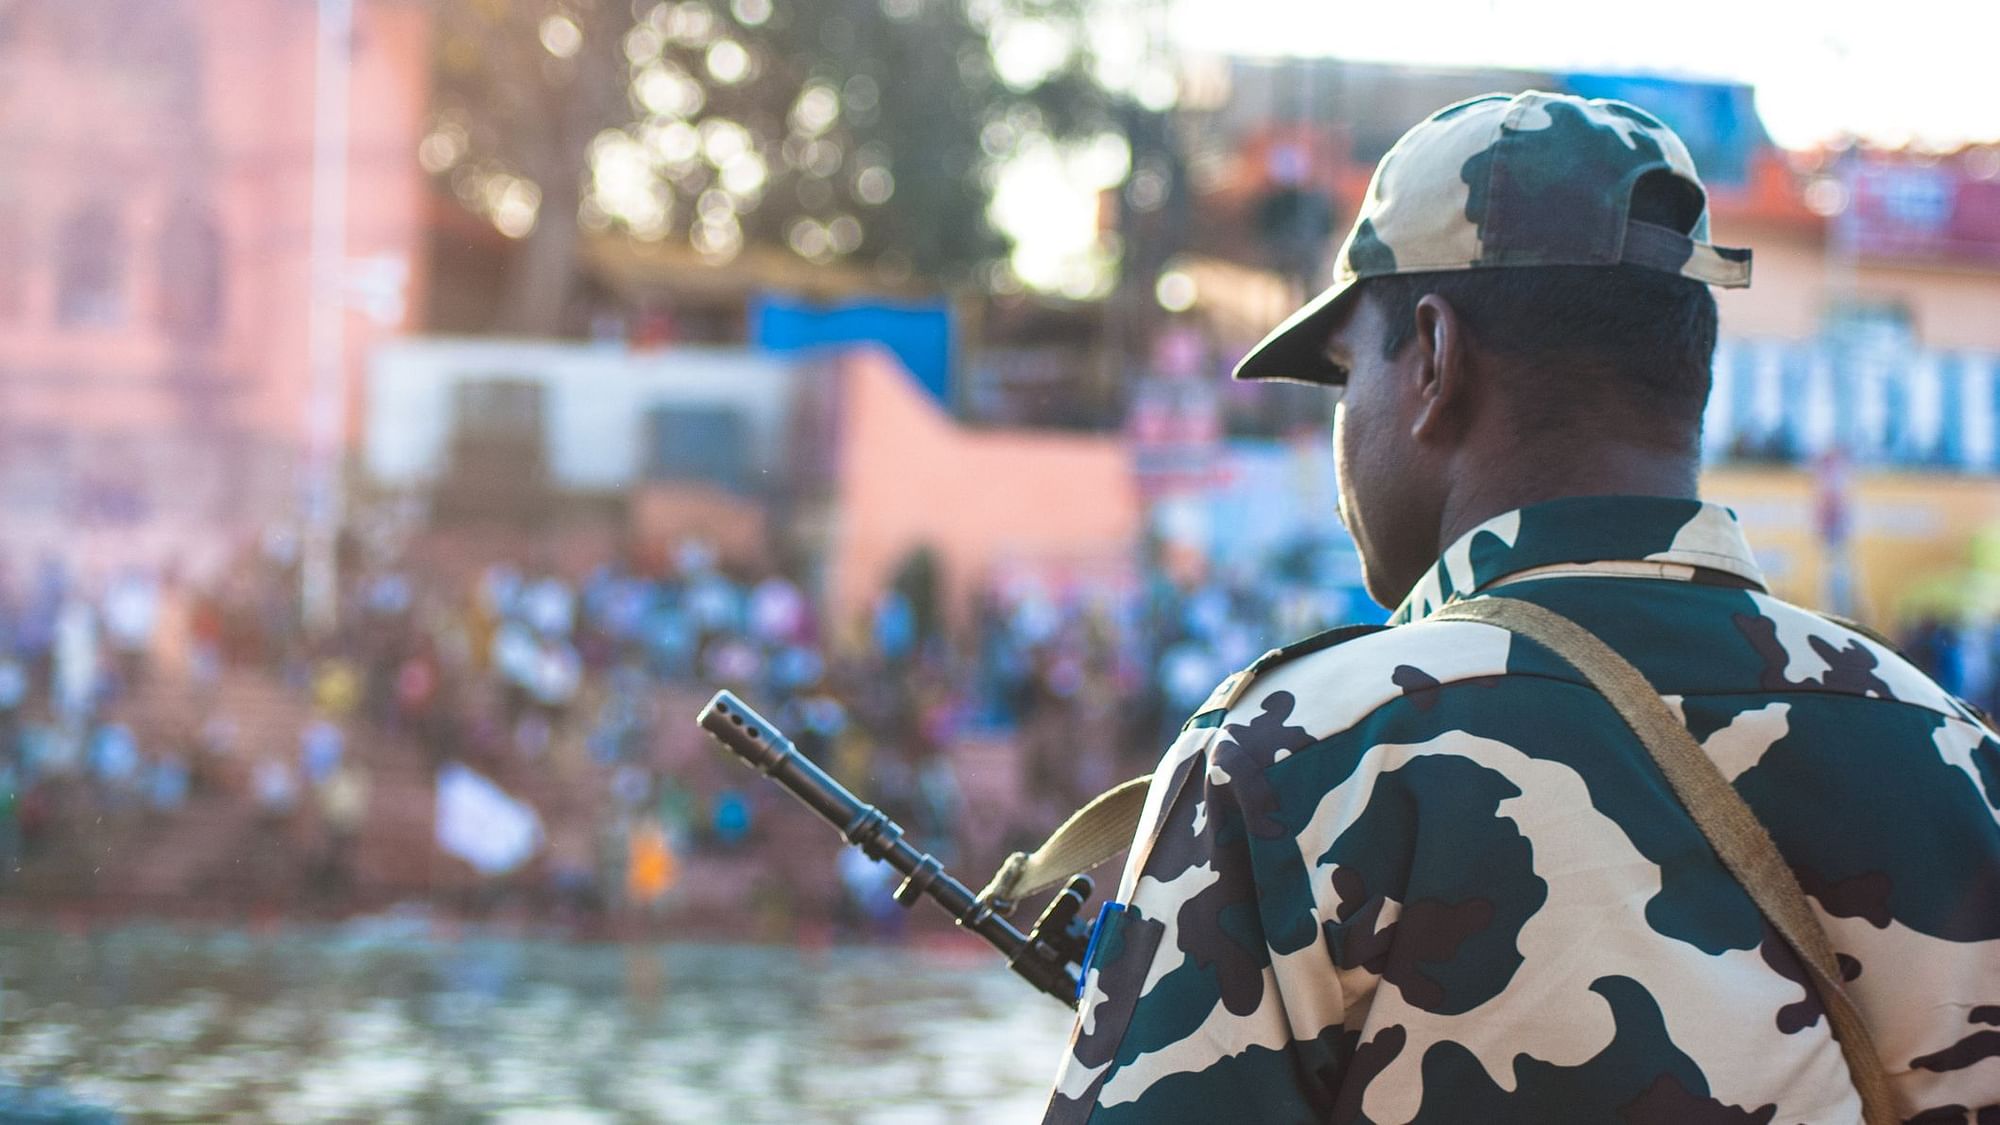 A CRPF Jawan stands guard. Image used for representation.